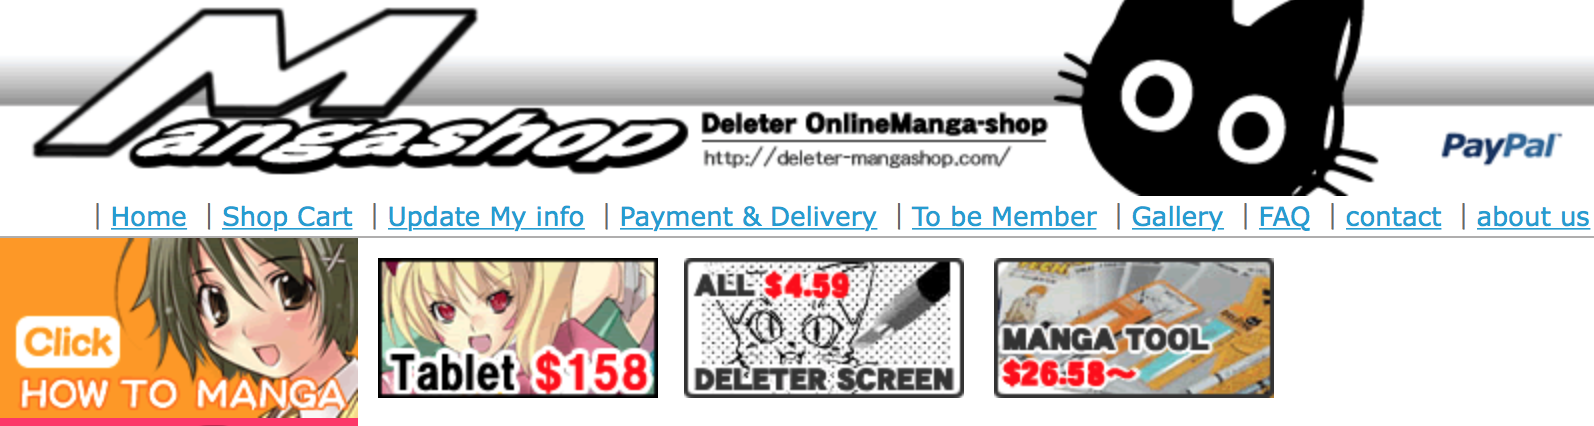 Deleter.com home page